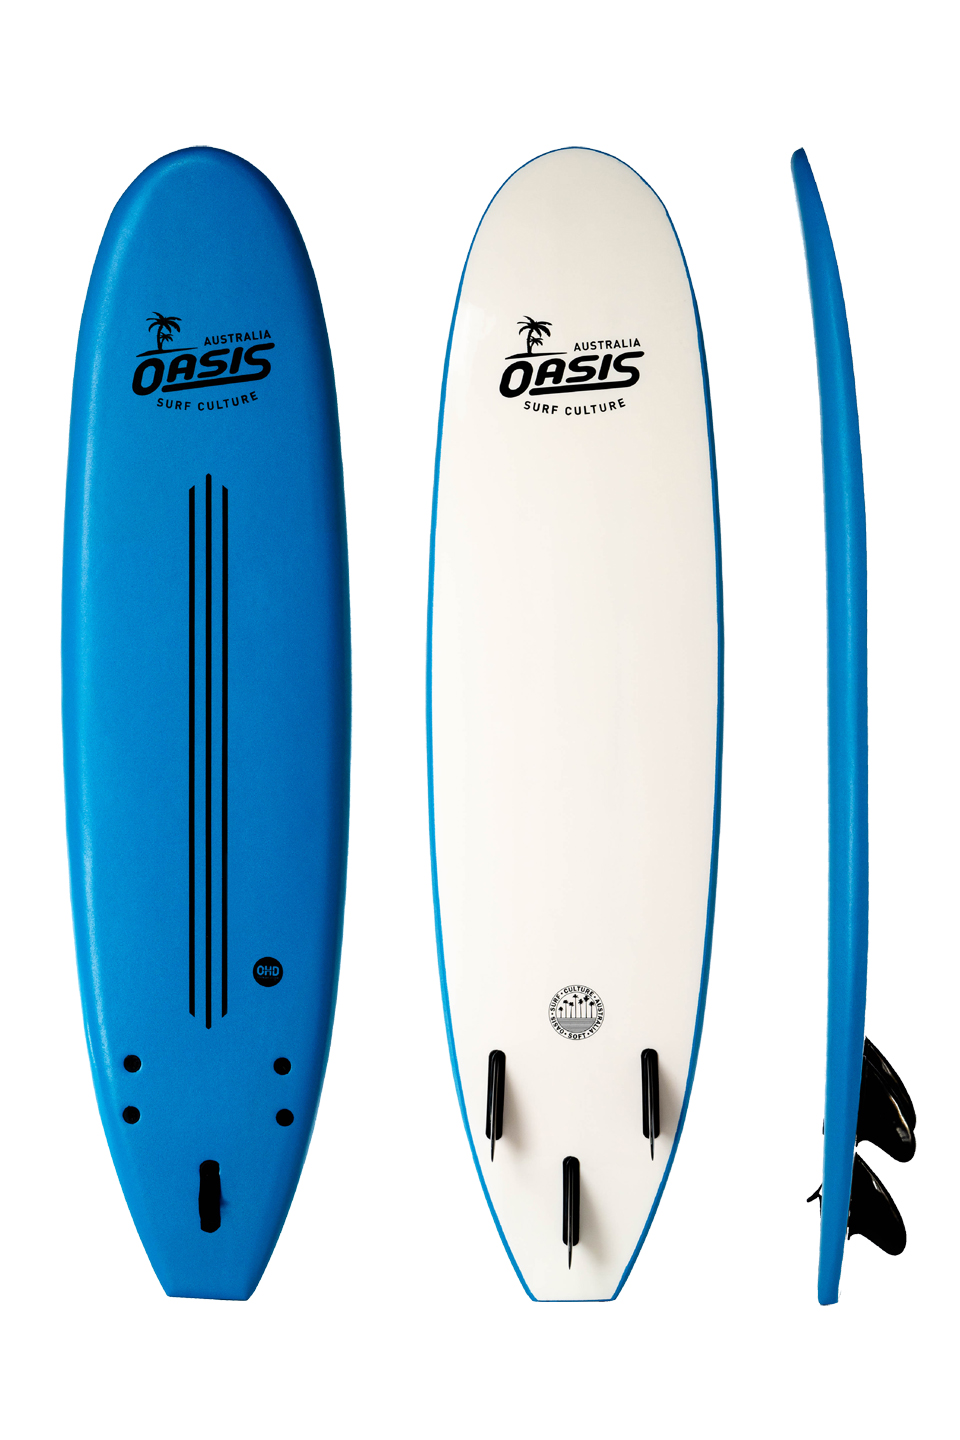 Wing surfing Tasmania gear available at Jay sails - wing ding 2021